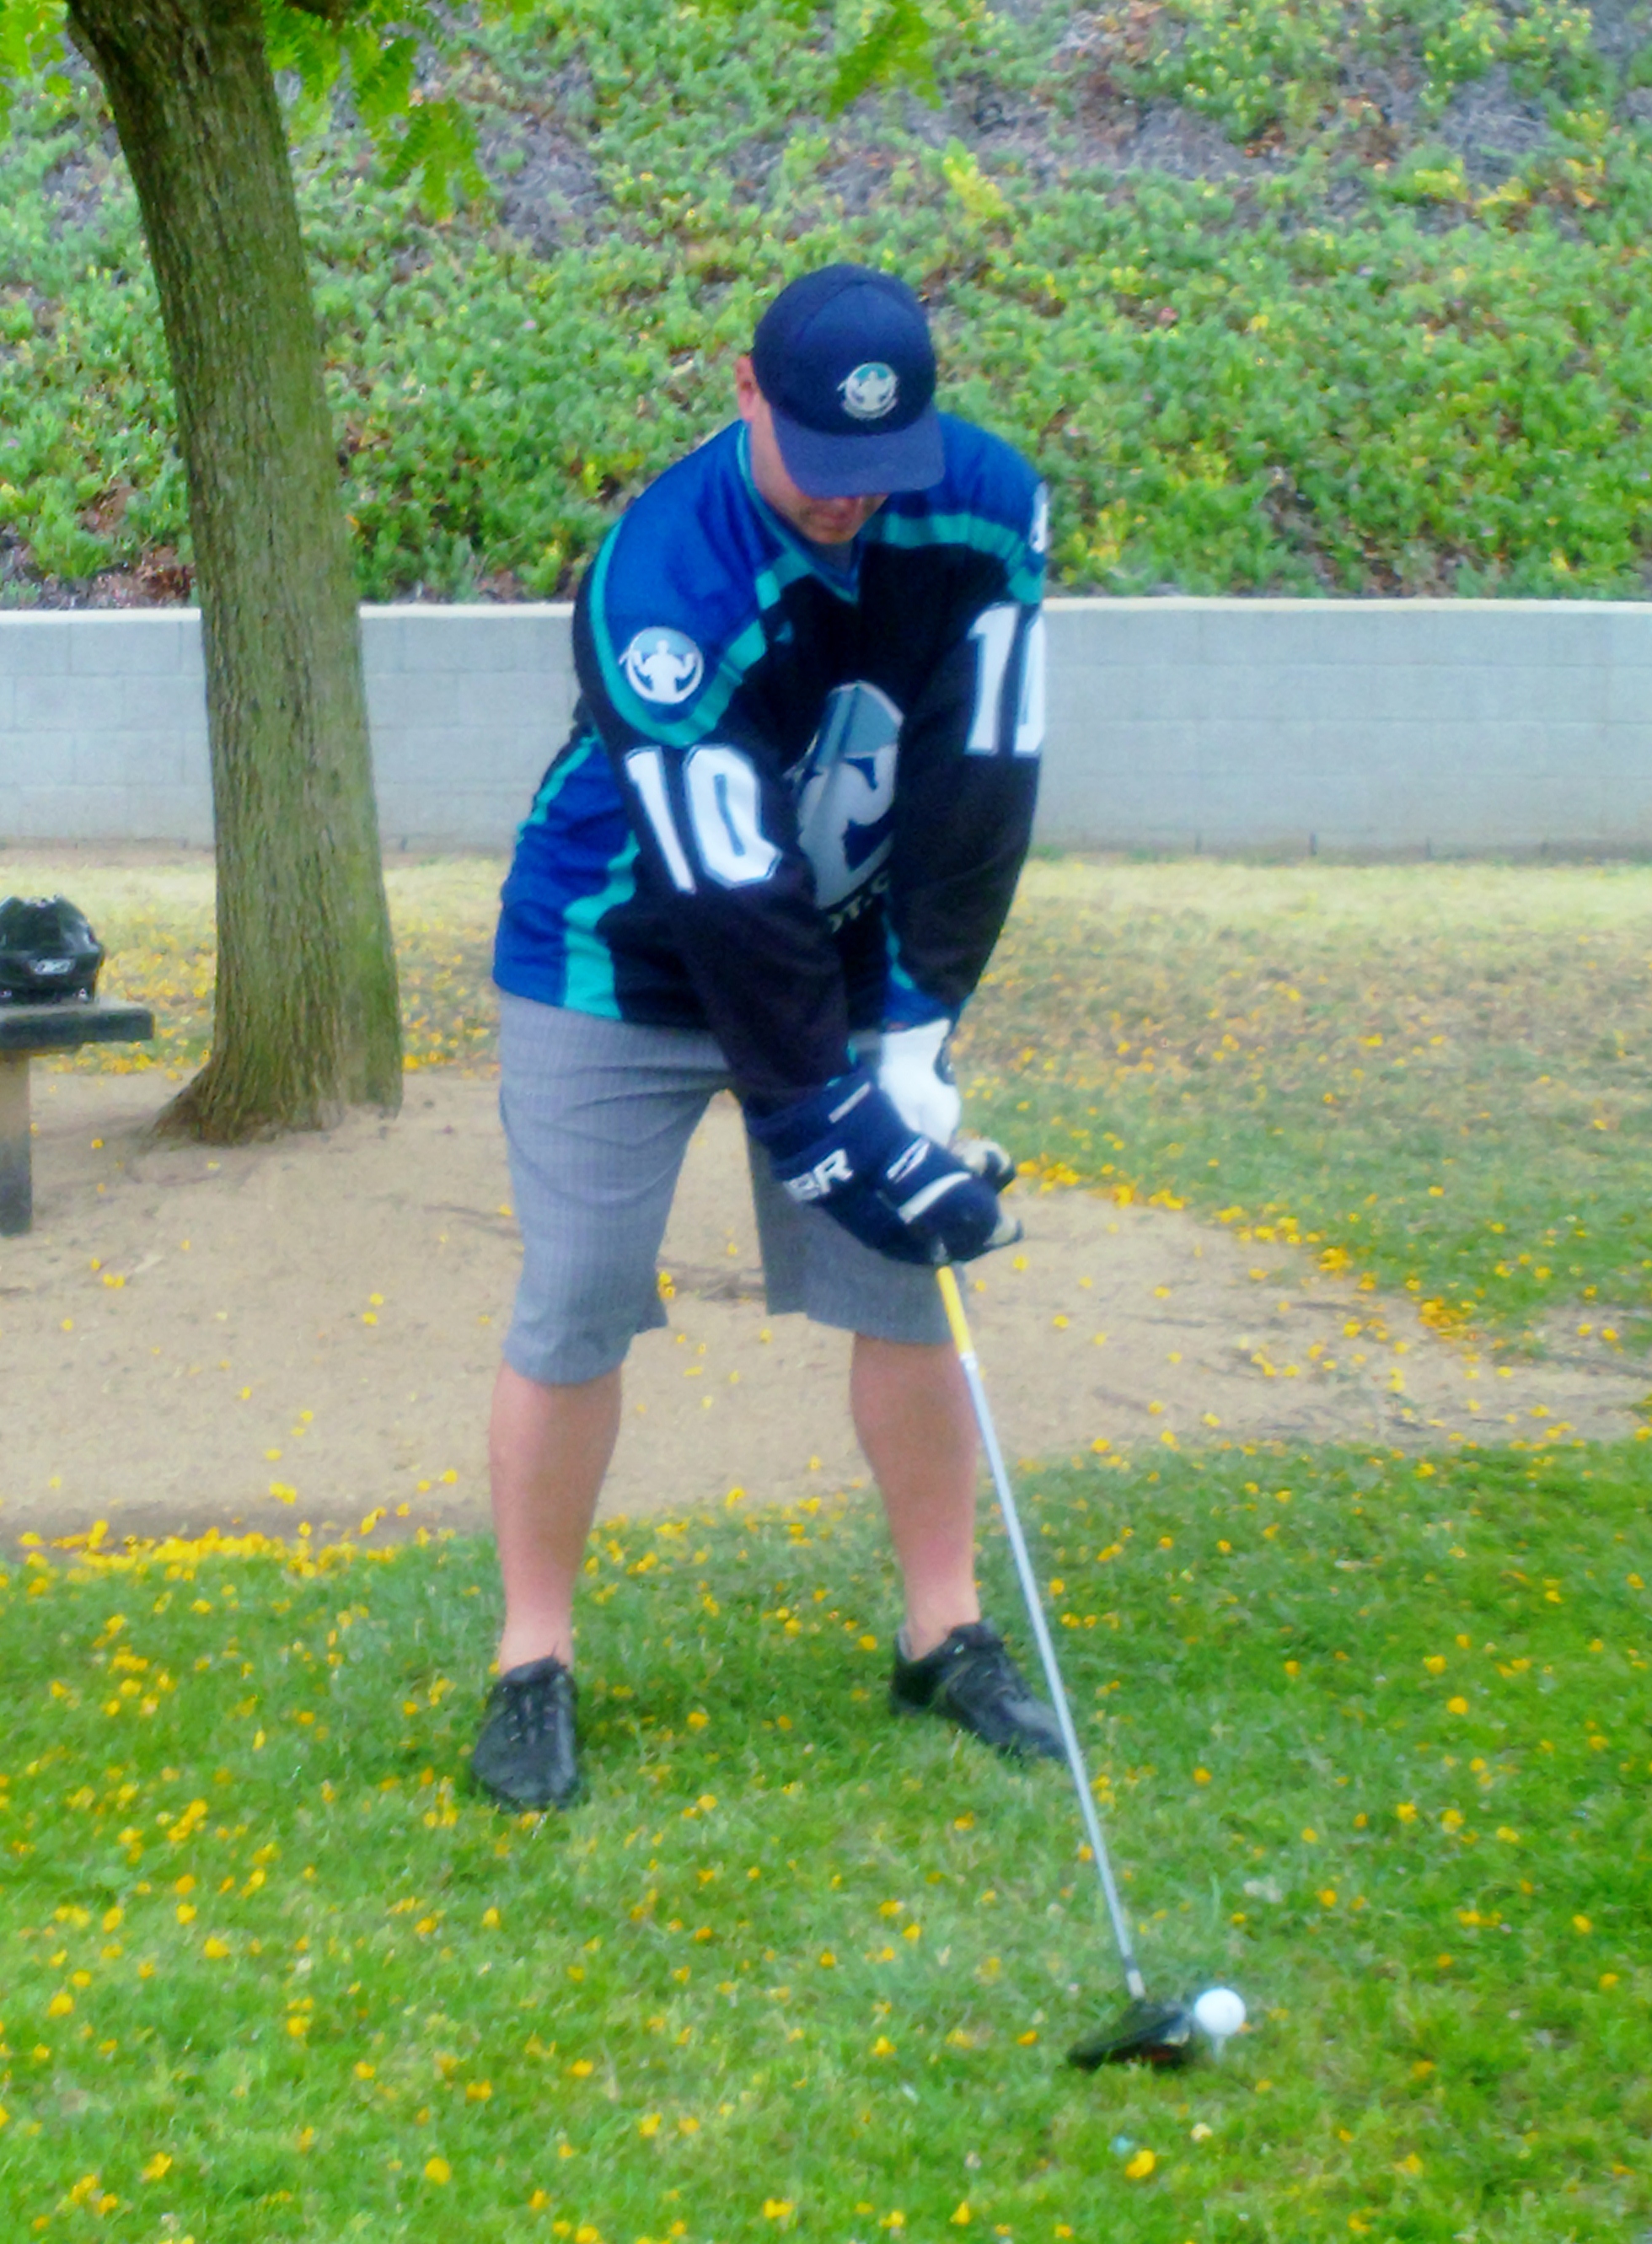 Golf is a Great Transition Sport for Hockey Players